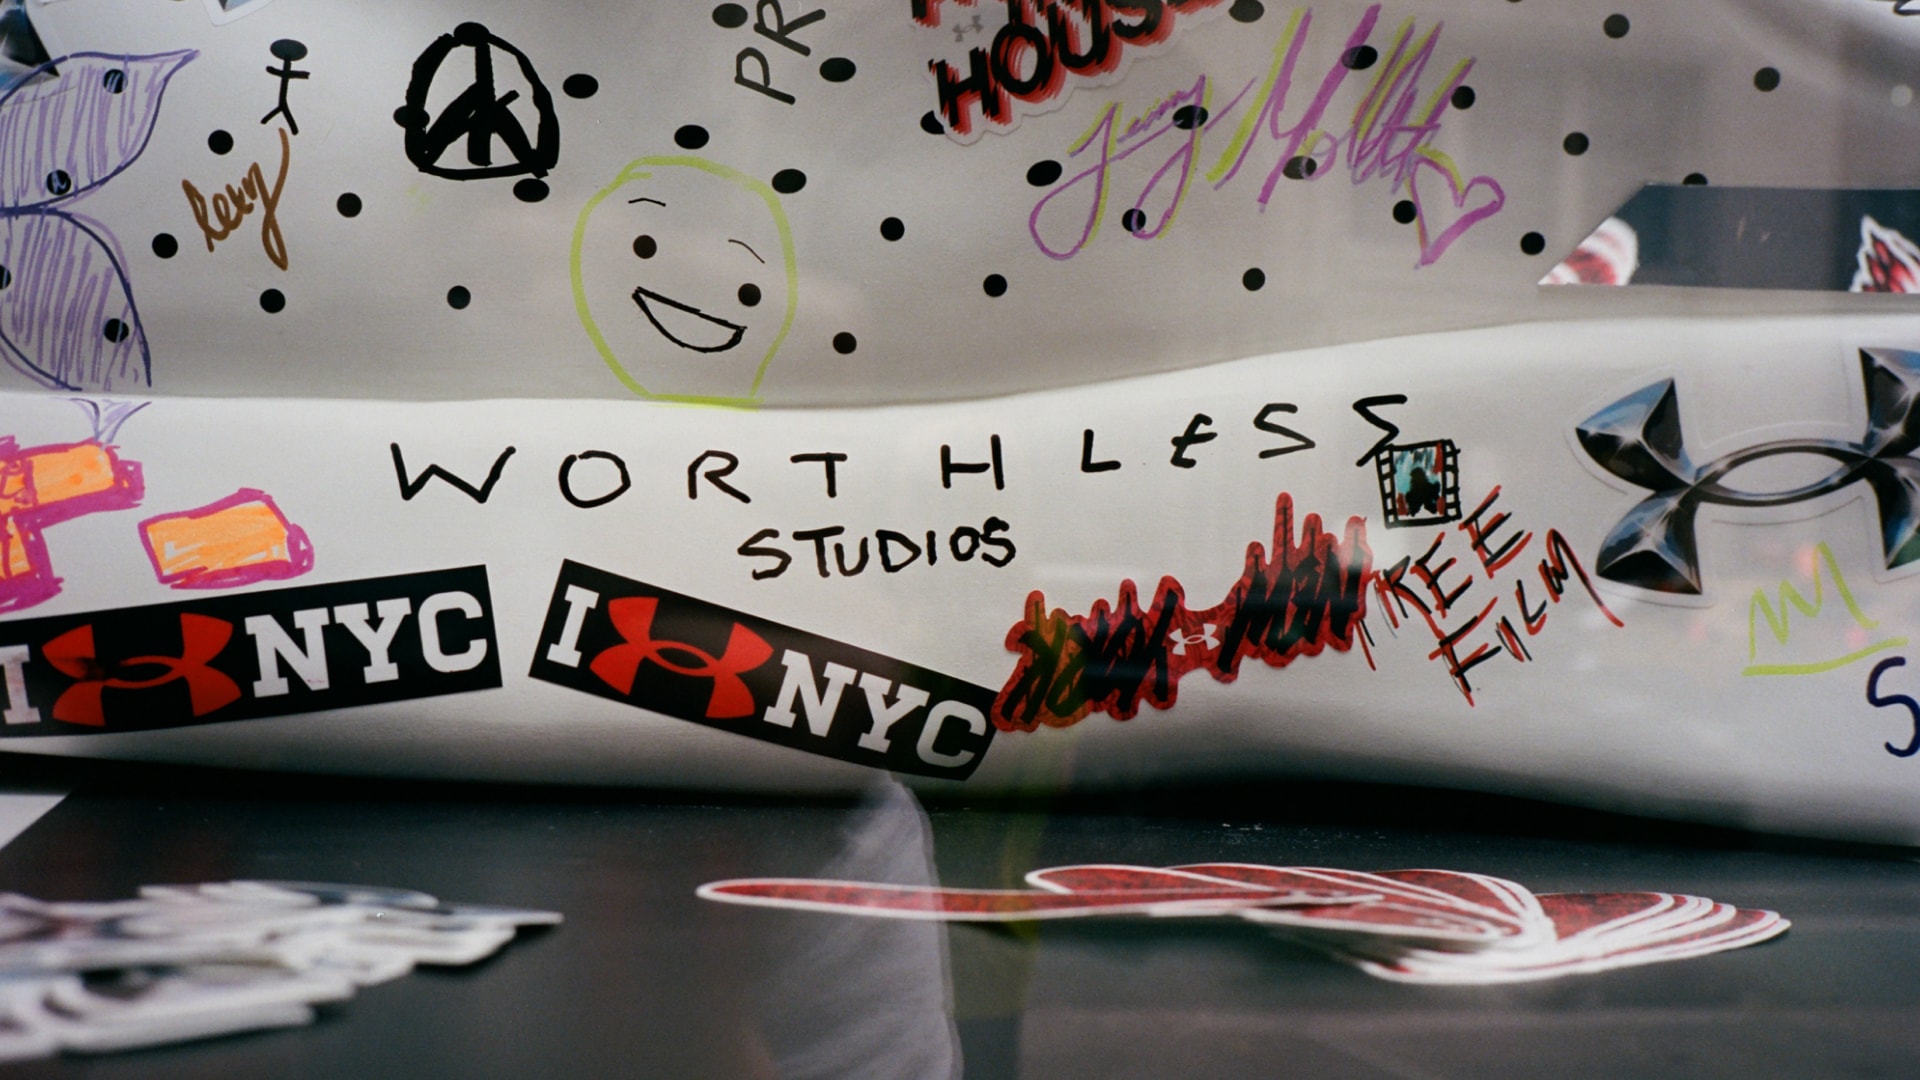 Under Armour Teams Up with NYC-Based Artist Hub Worthless Studios